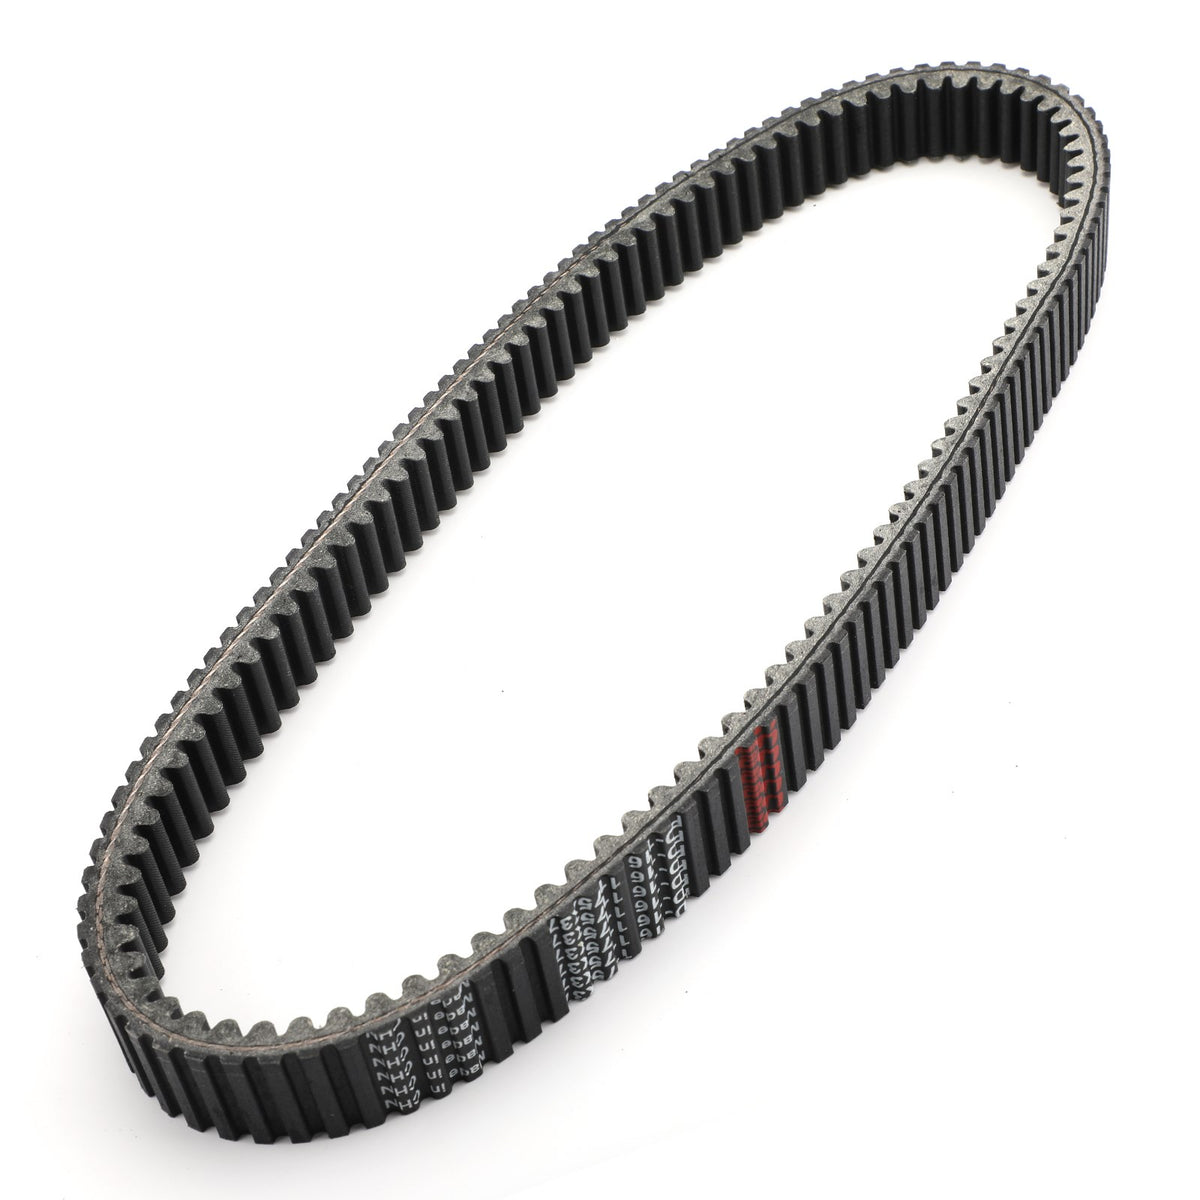 Drive Belt For Arctic Cat Snowmobile 0627-028 T660 Turbo Trail Touring 2004-2005